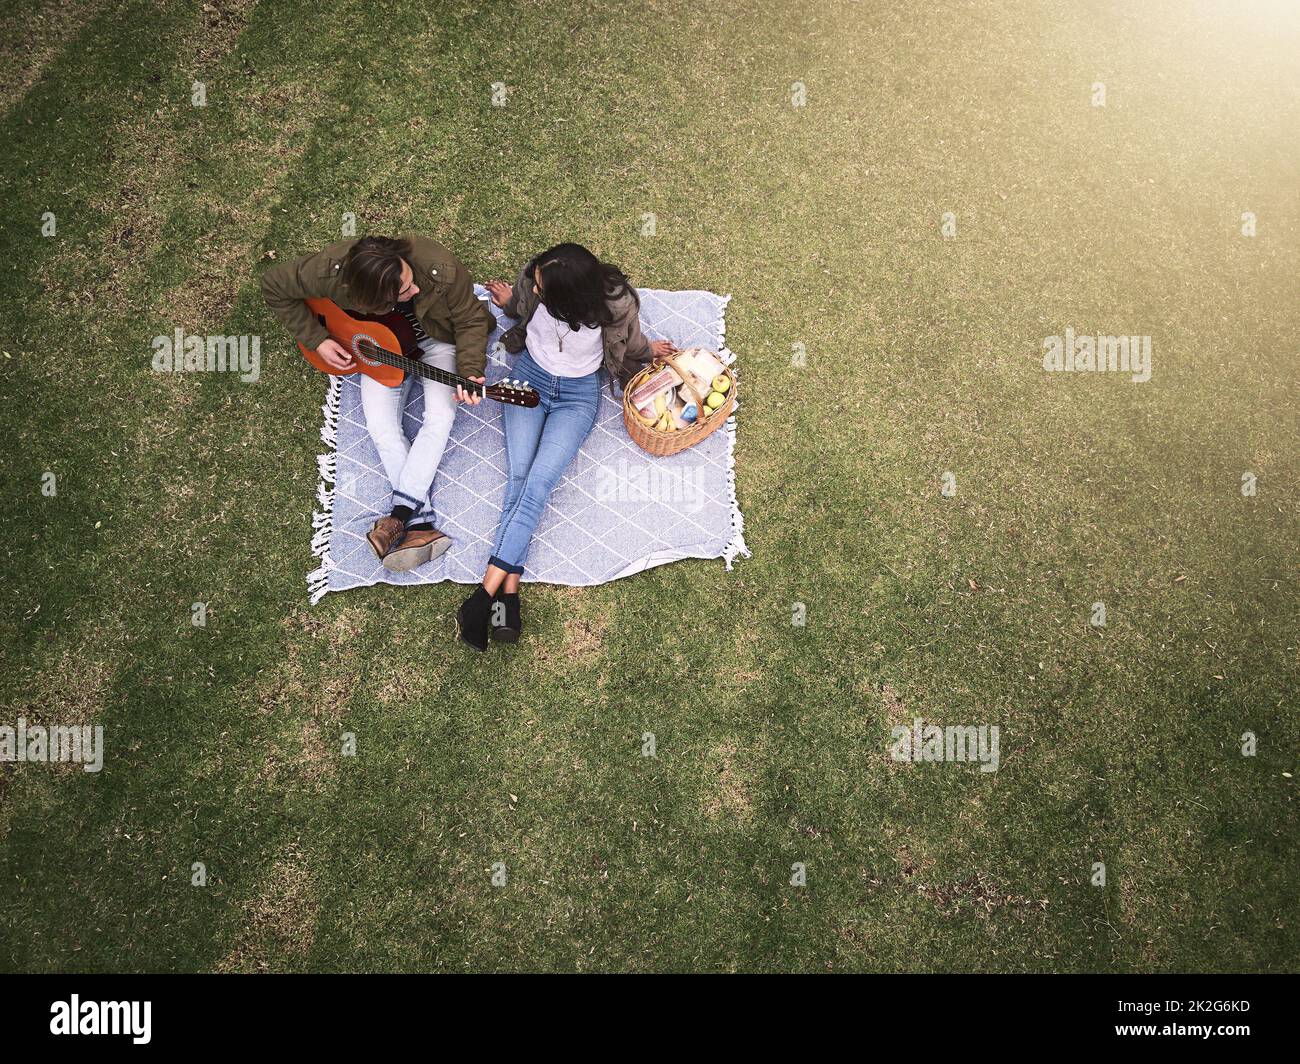 Romance and music in the park. High angle shot of a young couple having a romantic date in the park. Stock Photo